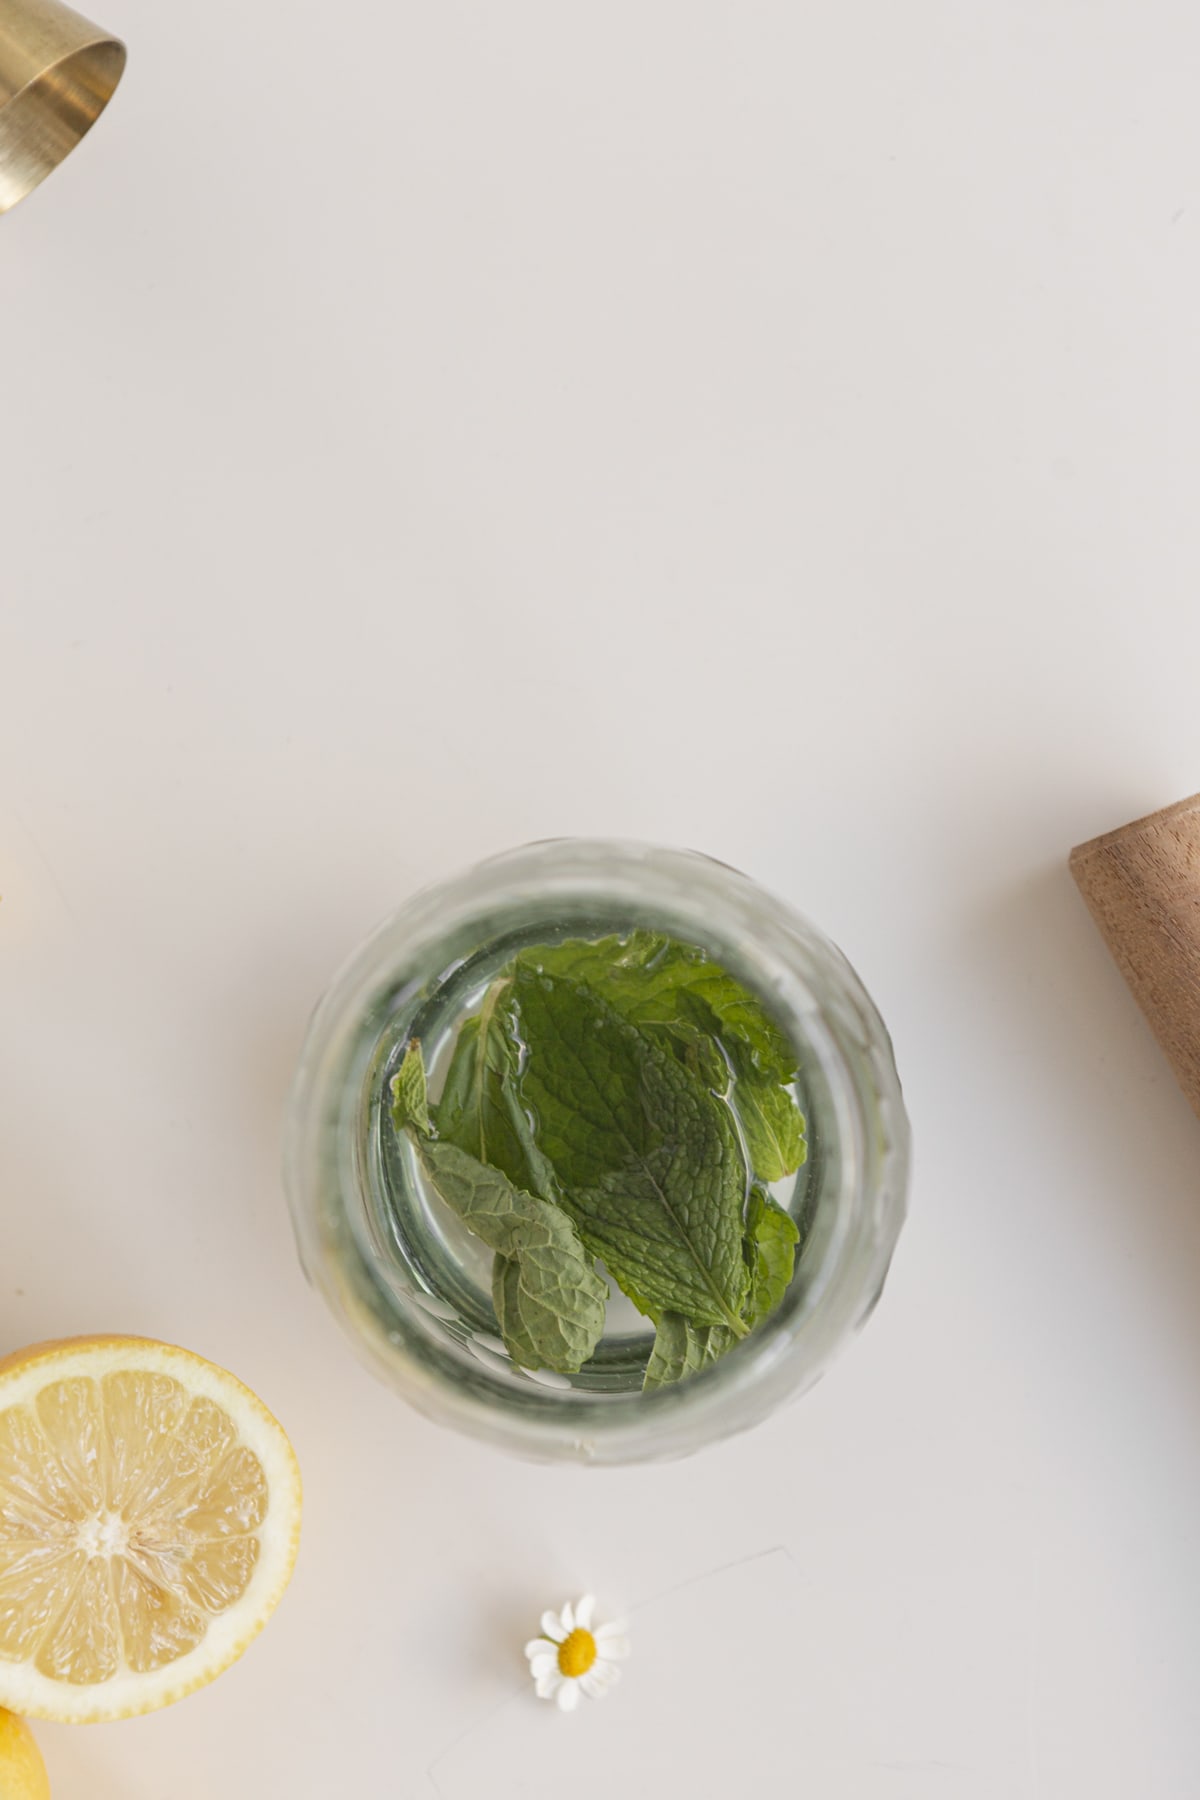 mint leaves in liquid in a cup to be muddled